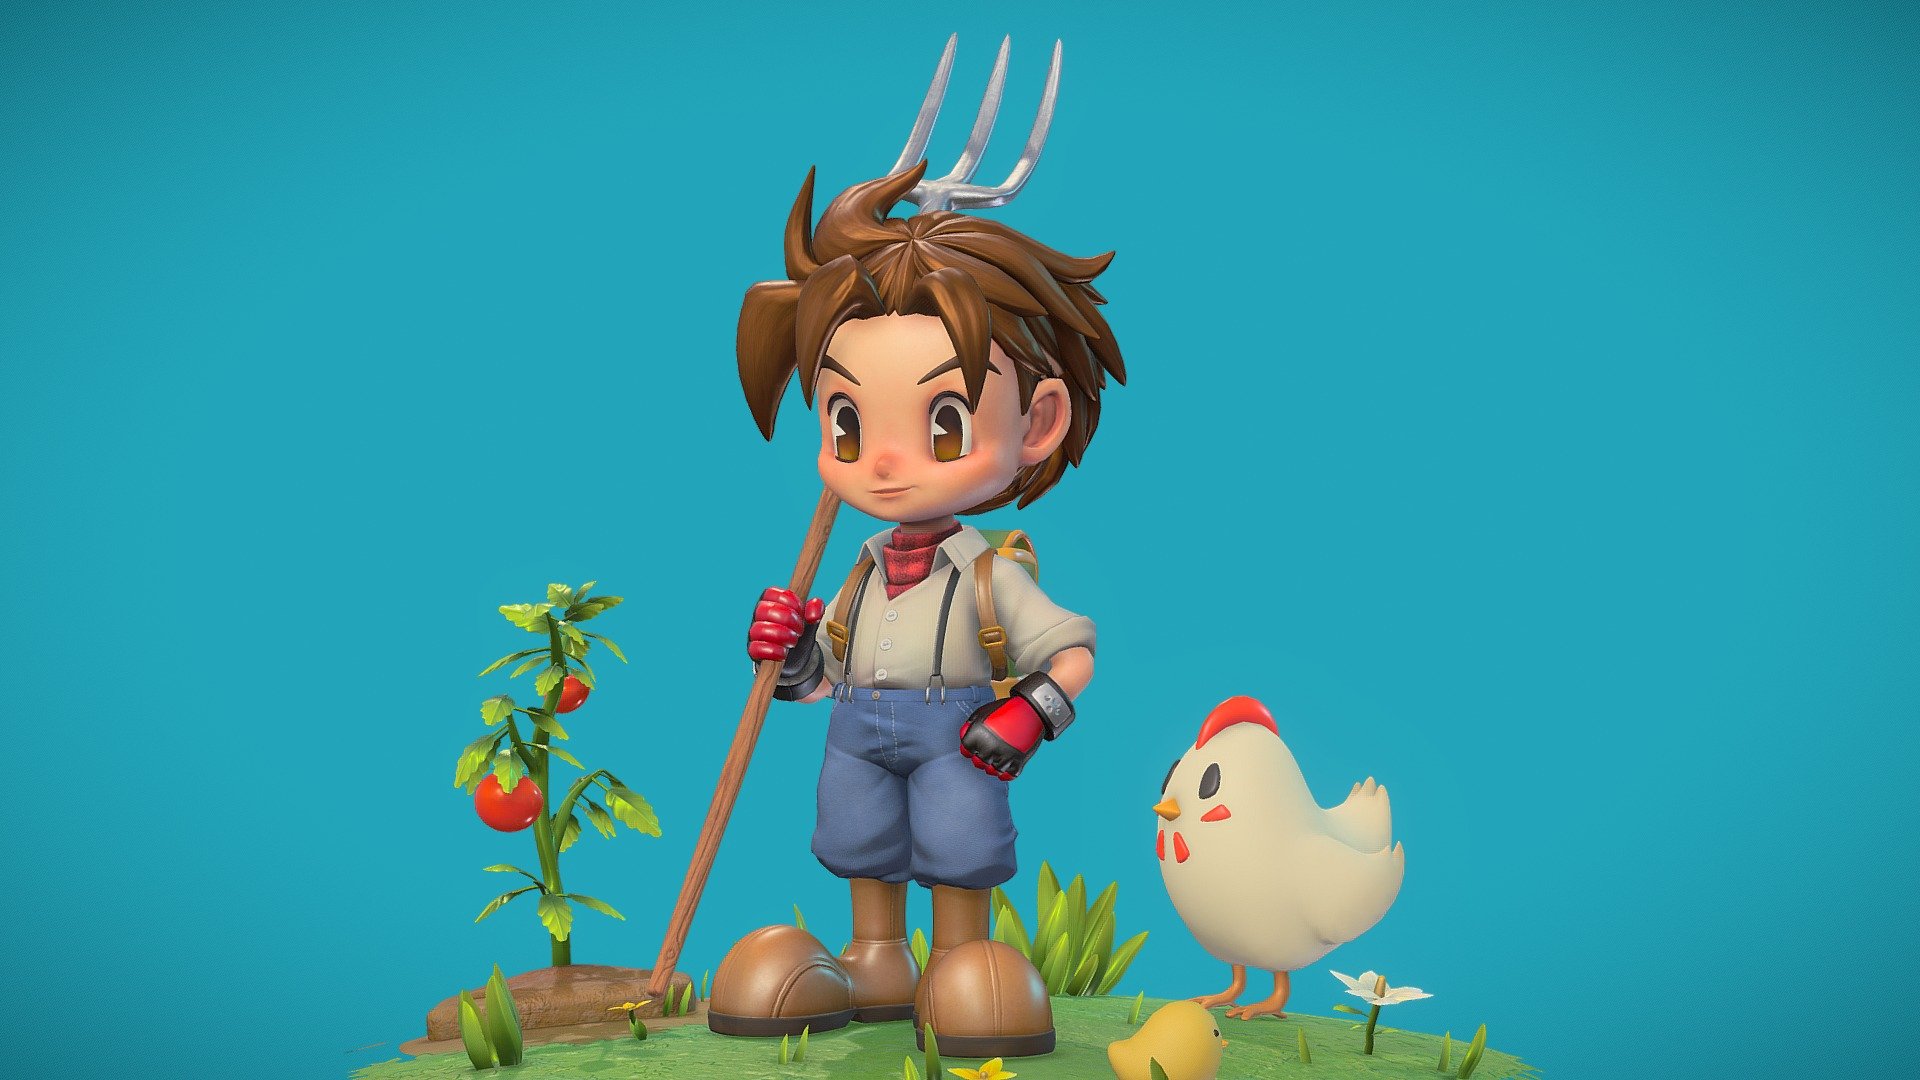 character: Mark.
Please, switch to HD for better resolution.
more + https://www.artstation.com/artwork/8laVeO - Harvest Moon A Wonderful Life - 3D model by Patricia Mendonca (@teapaty) 3d model